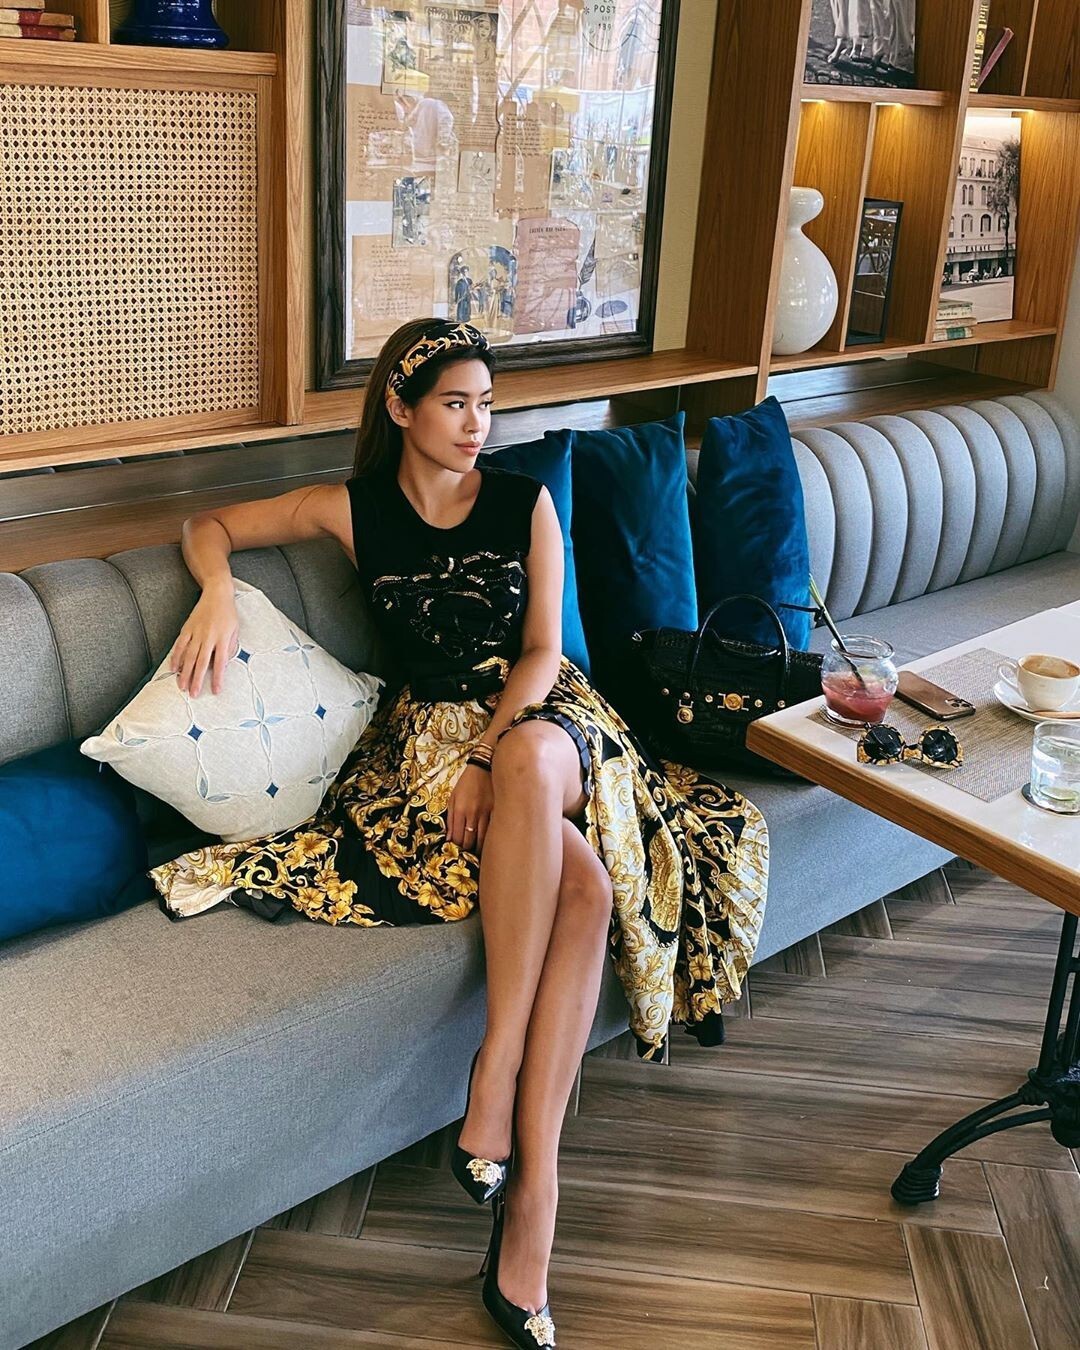 IPPG billionaire Tien Nguyen is Vietnam’s richest heiress, and she’s been pretty busy since recovering from Covid-19. Photo: @tiennguyenn/Instagram